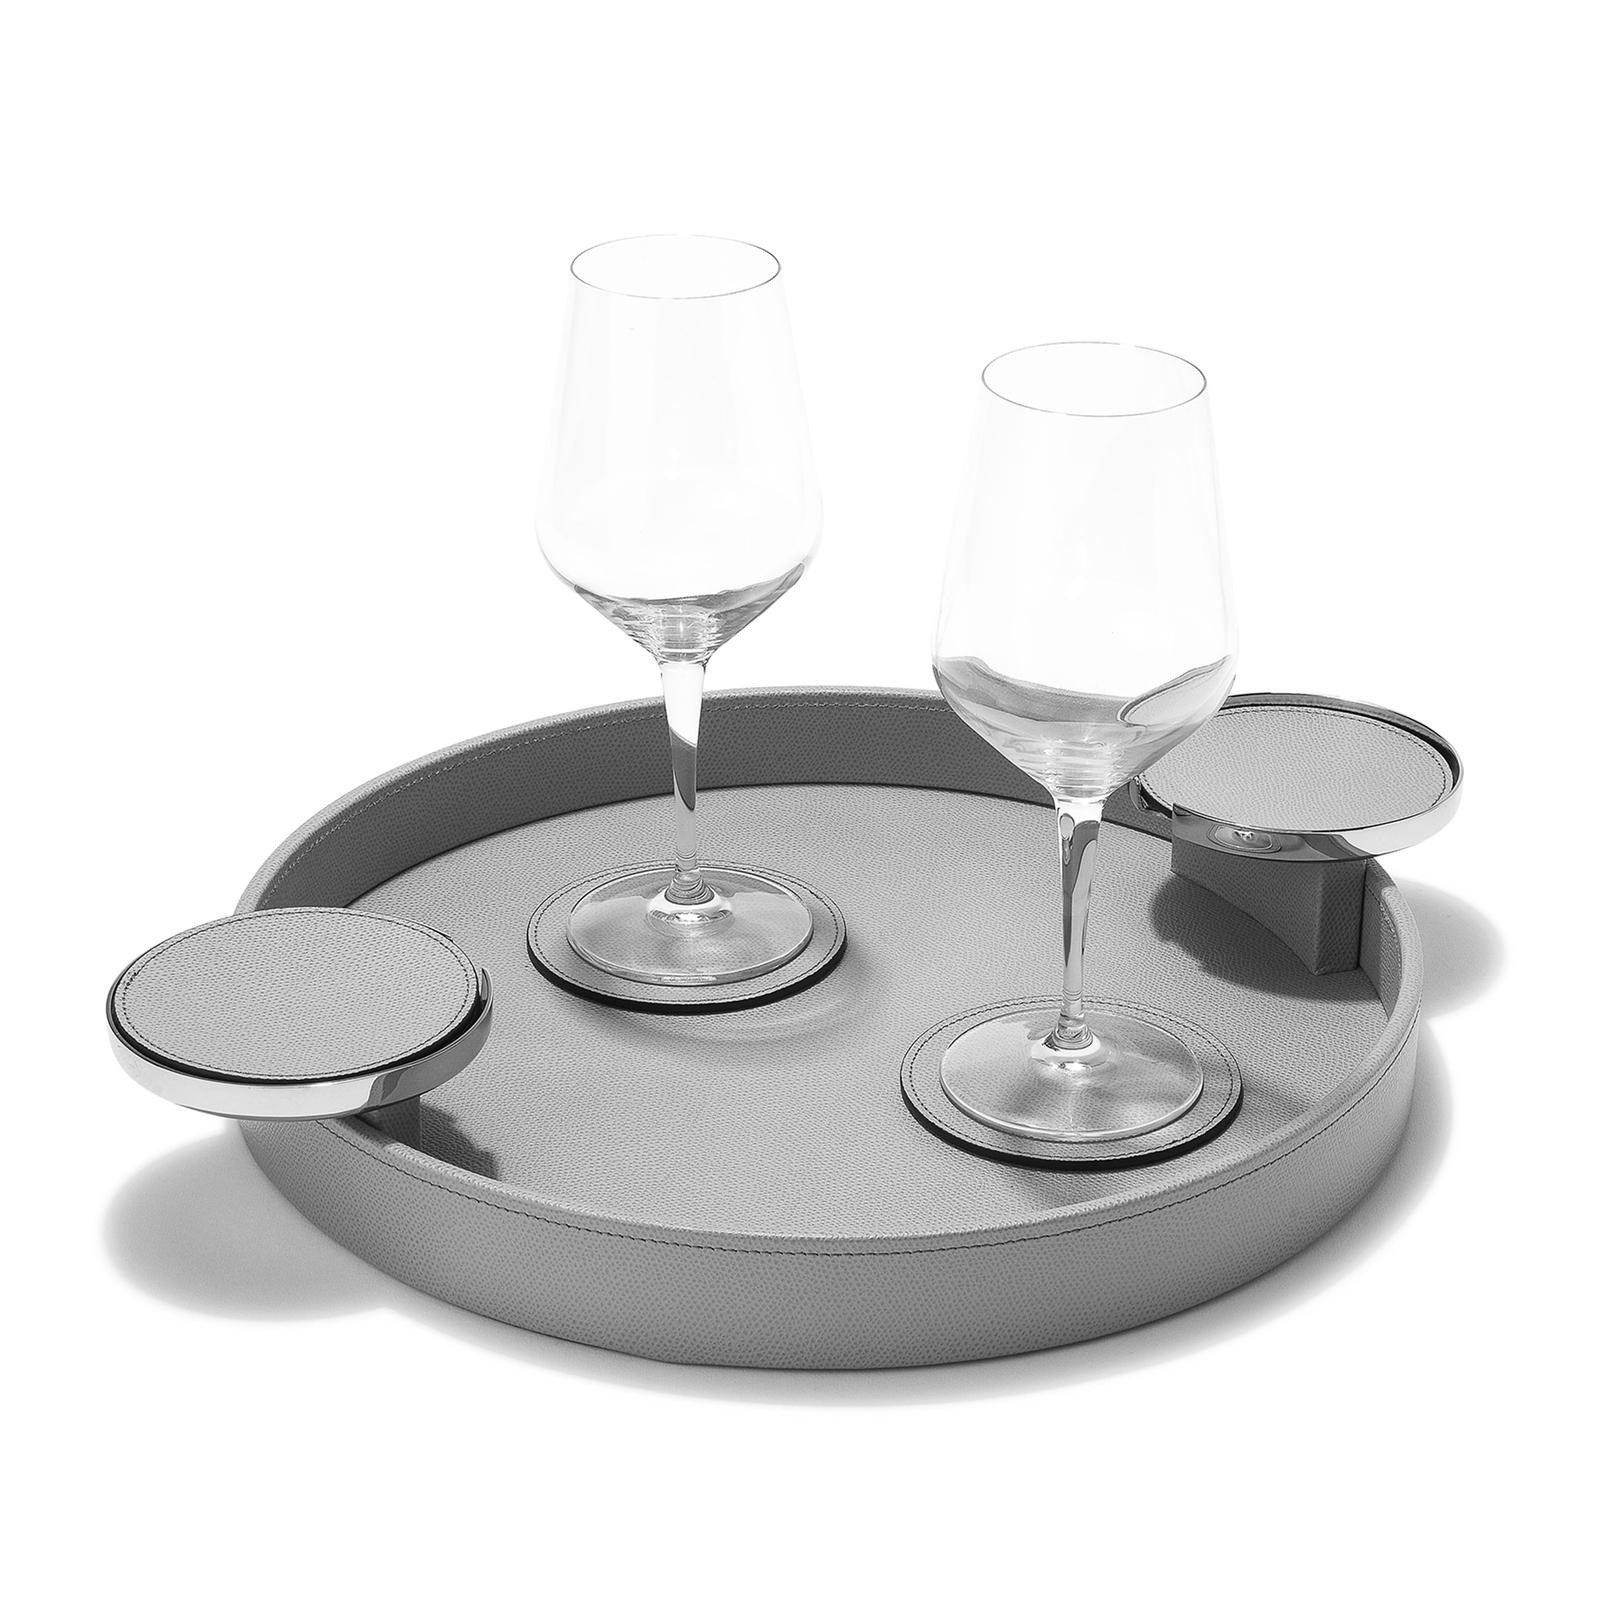 These two sophisticated trays have a wooden structure entirely upholstered in leather and the two side handles mounted in chrome metal, with their unique round shape, are also perfect as glass holders. Both the large purple tray and the small beige